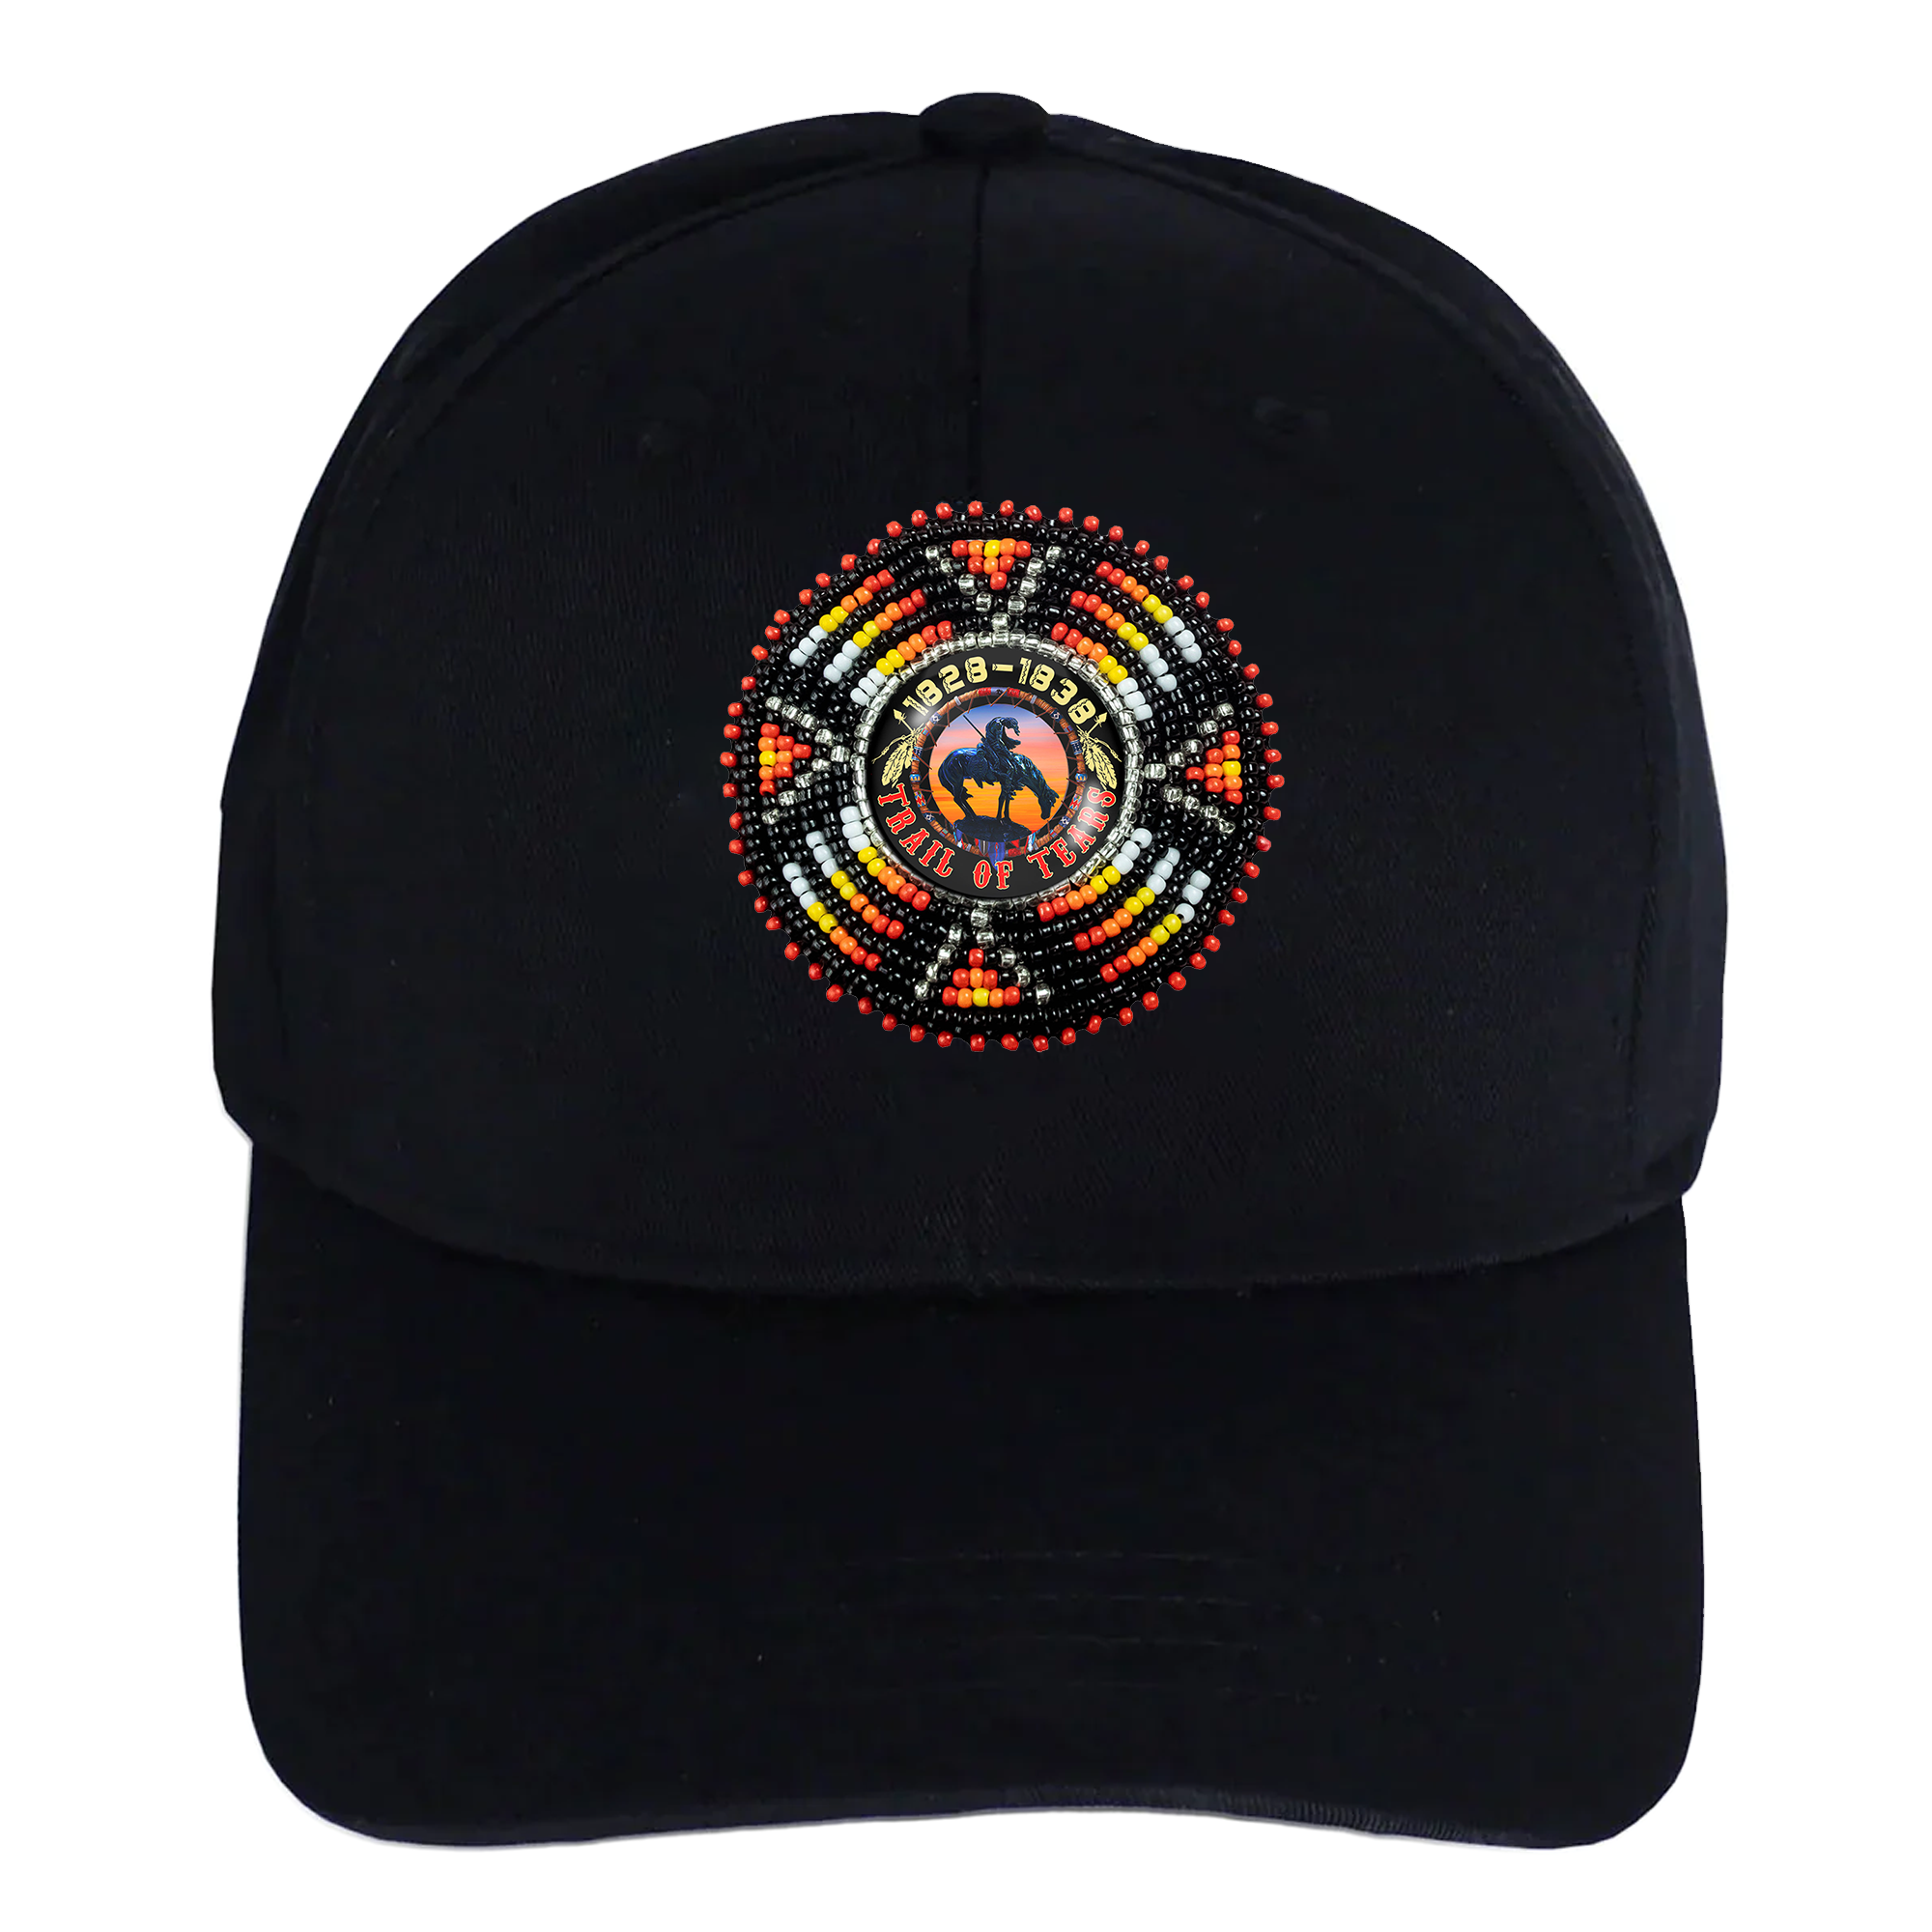 SALE 50% OFF - Trail of Tears Baseball Cap With Patch Cotton Unisex Native American Style